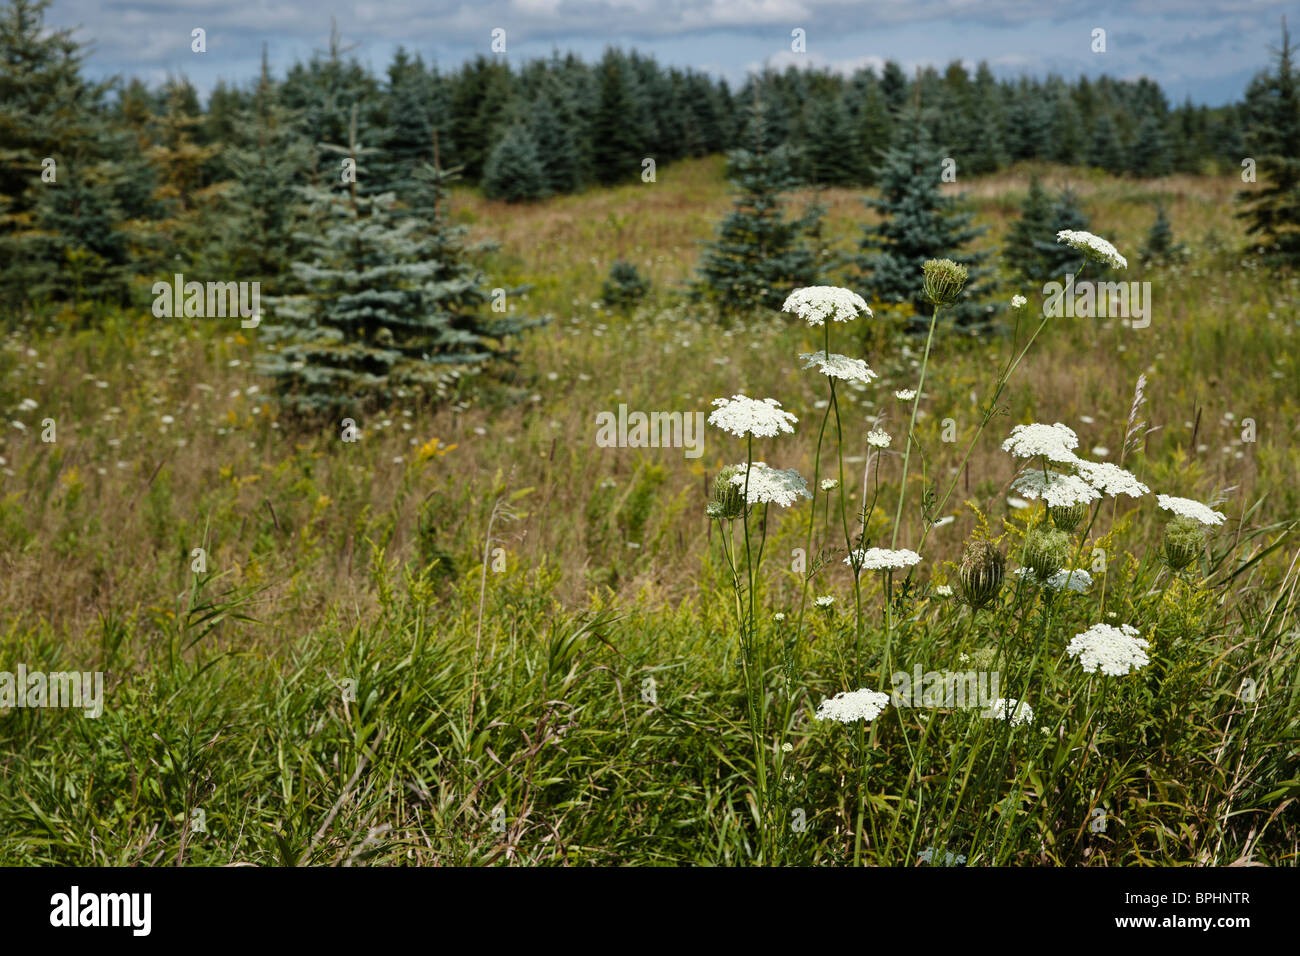 A rural Michigan landscape with Queen Ann's Lace wildflowers Colorado Blue Spruce trees in background nobody wallpapers wallpaper hi-res Stock Photo